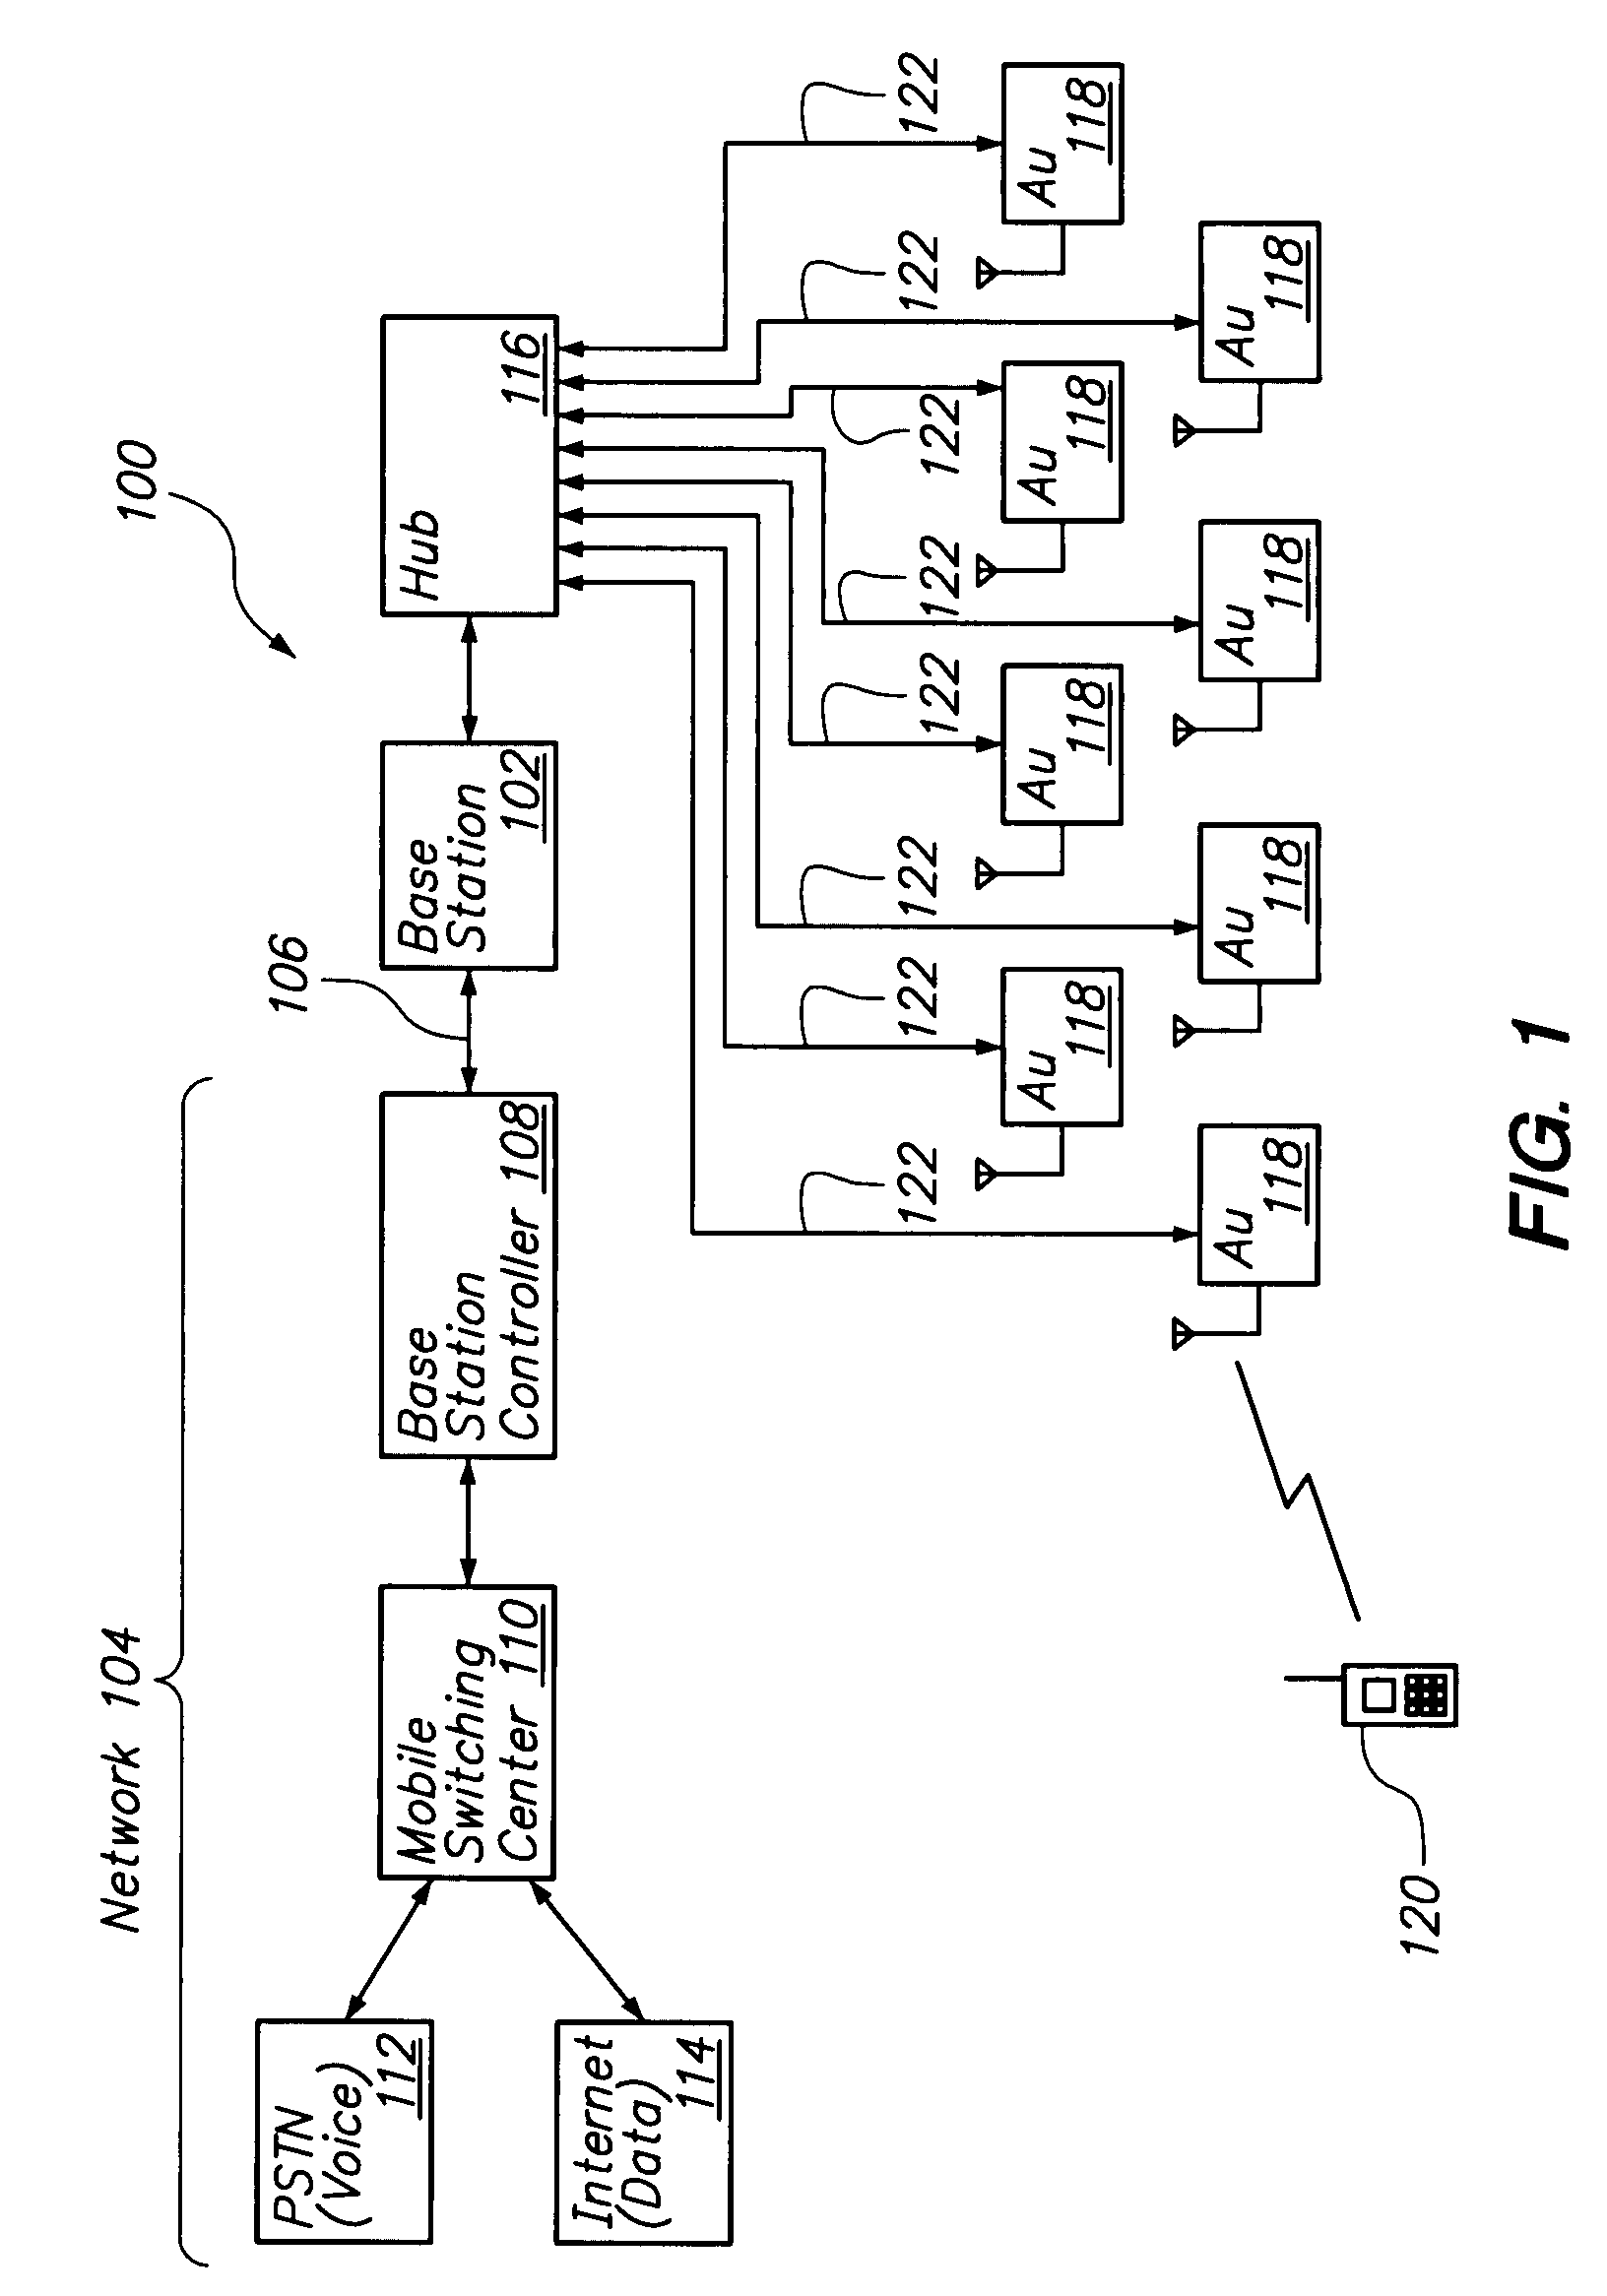 Distributed antenna communications system